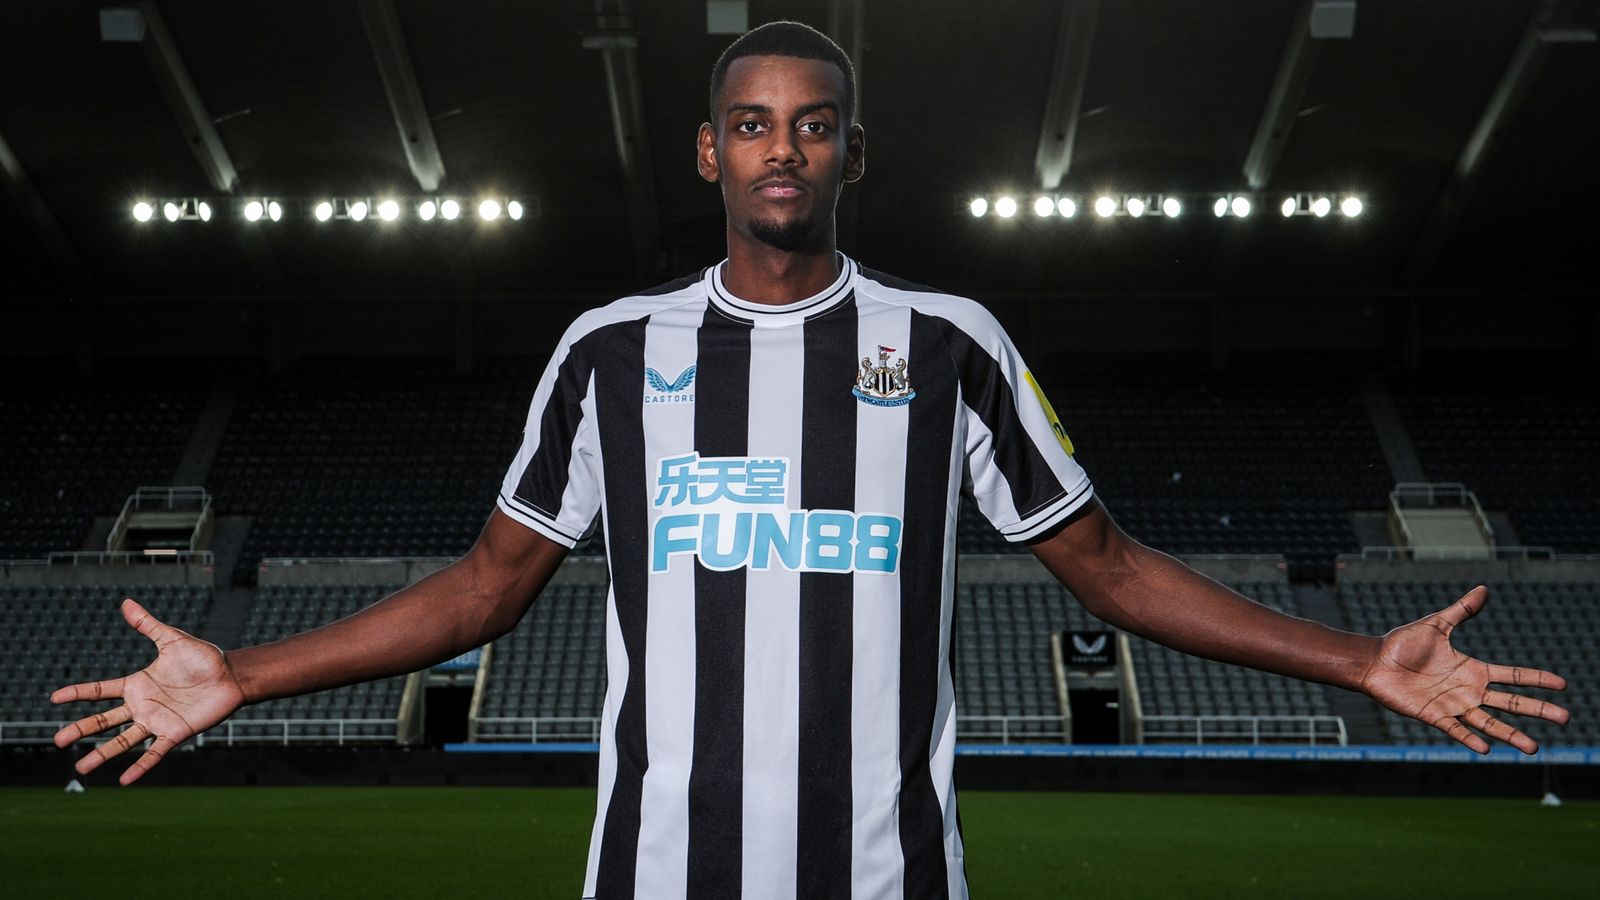 Alexander Isak: Newcastle sign striker from Real Sociedad for club-record £63m